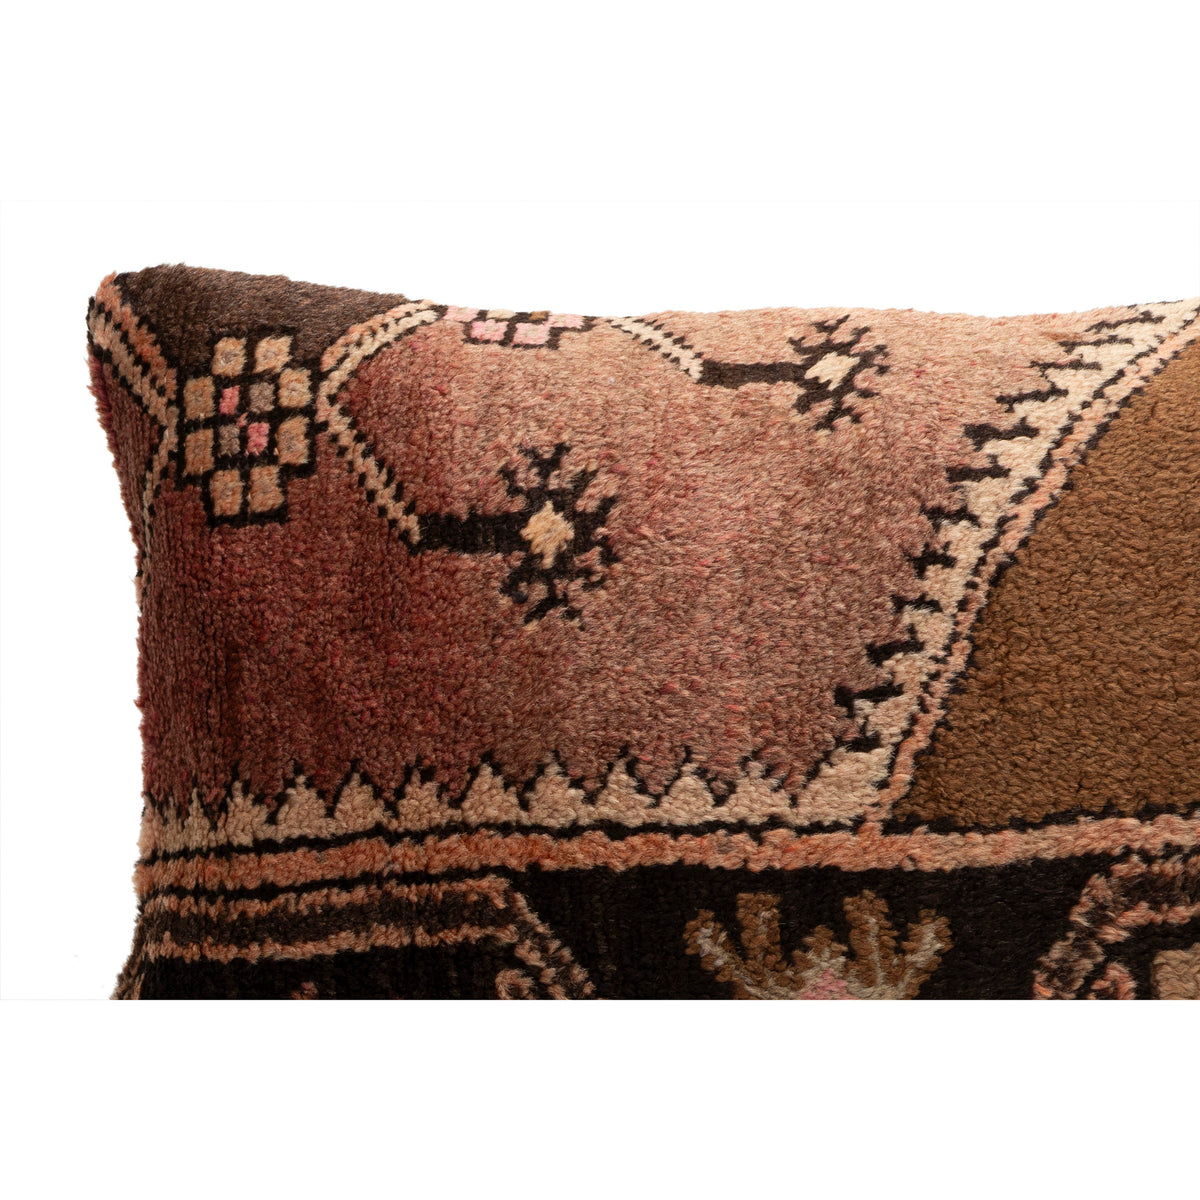 Handwoven Turkish Rug Pillow Cover 16" x 24"